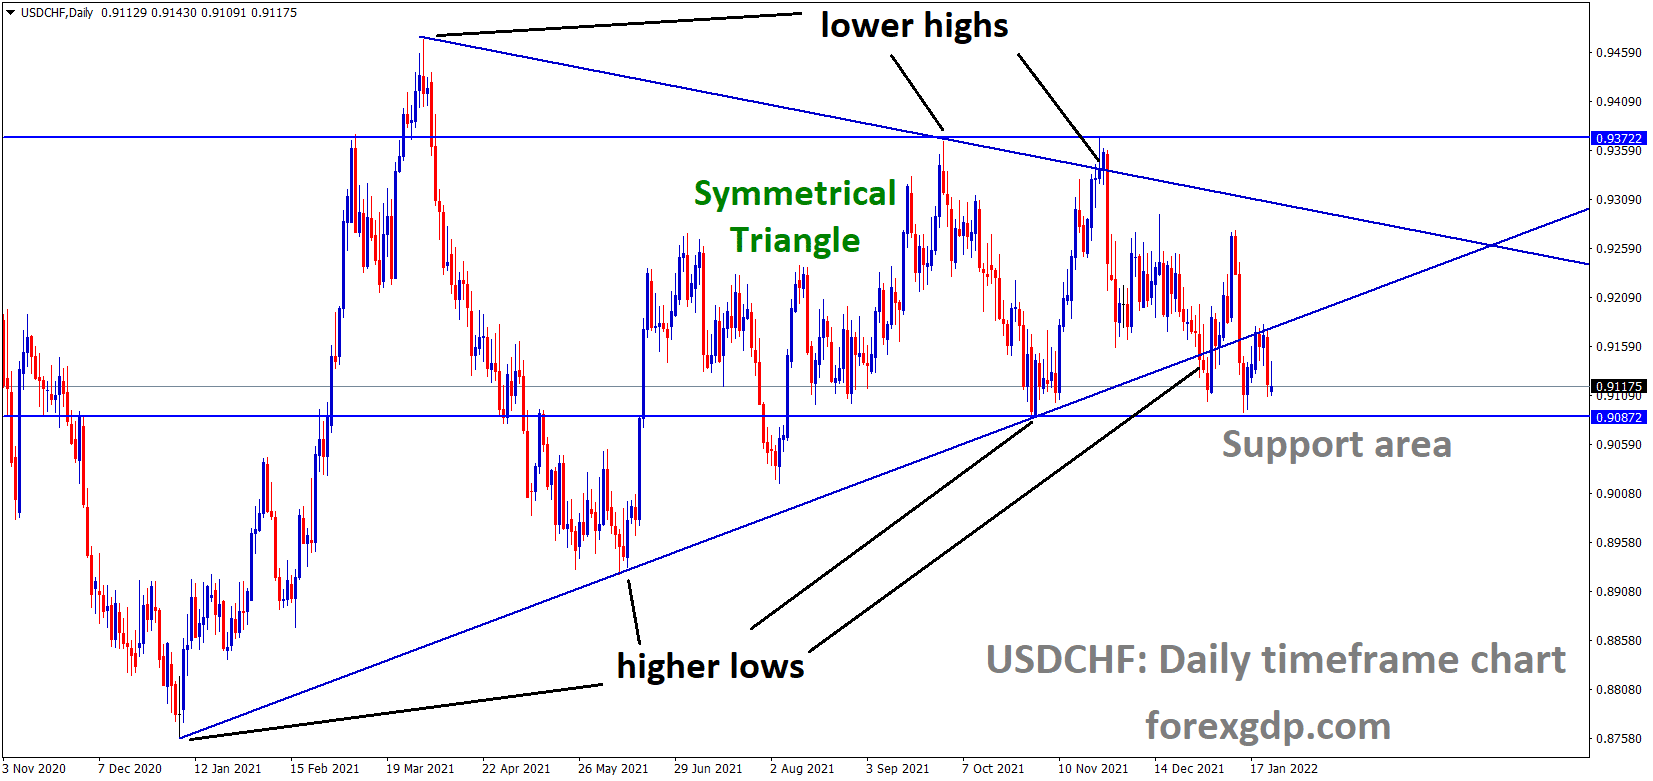 USDCHF is moving in the Symmetrical triangle pattern and the market has reached the Support area of the Box Pattern.